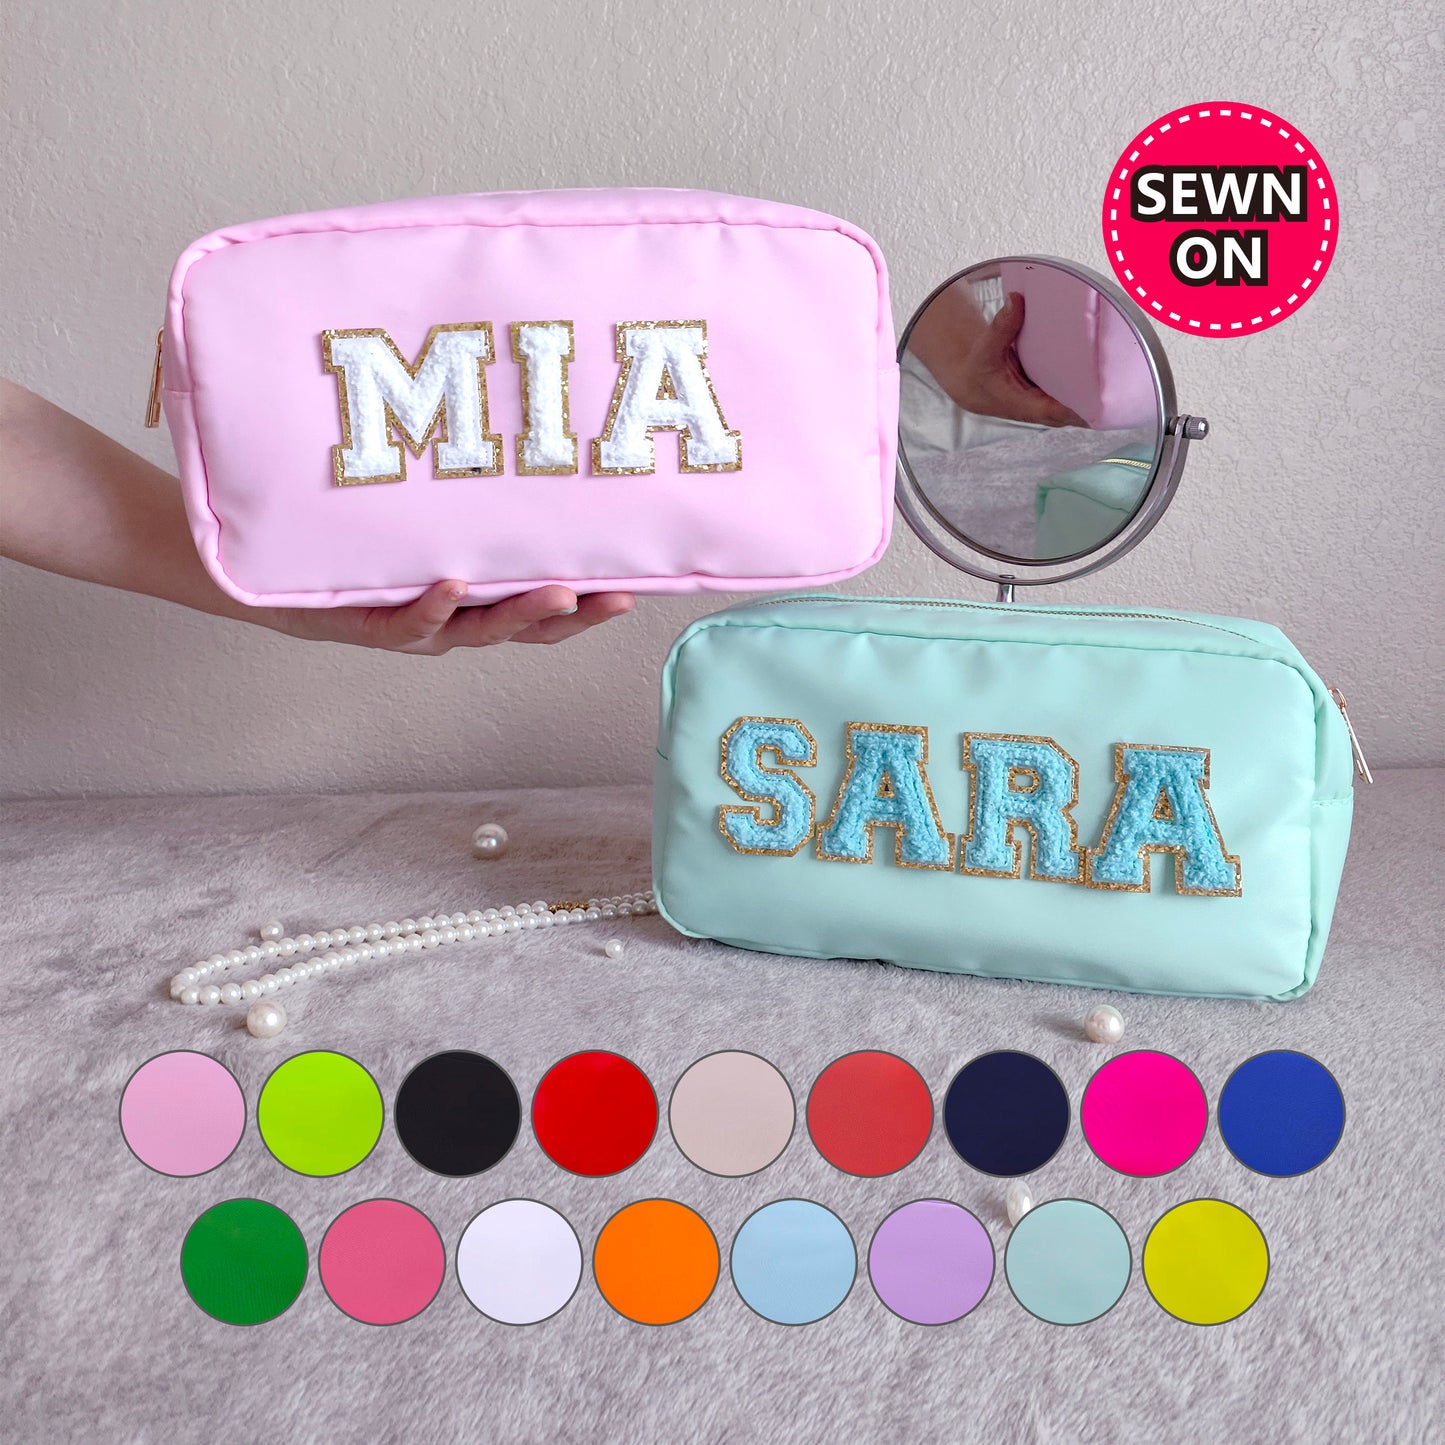 Sewn Patches Large Cosmetic Bag Personalized Nylon Makeup Bag Custom Pouch Chenille Patch Large Size Travel Case Large Toiletry spf Bag Bride Gift